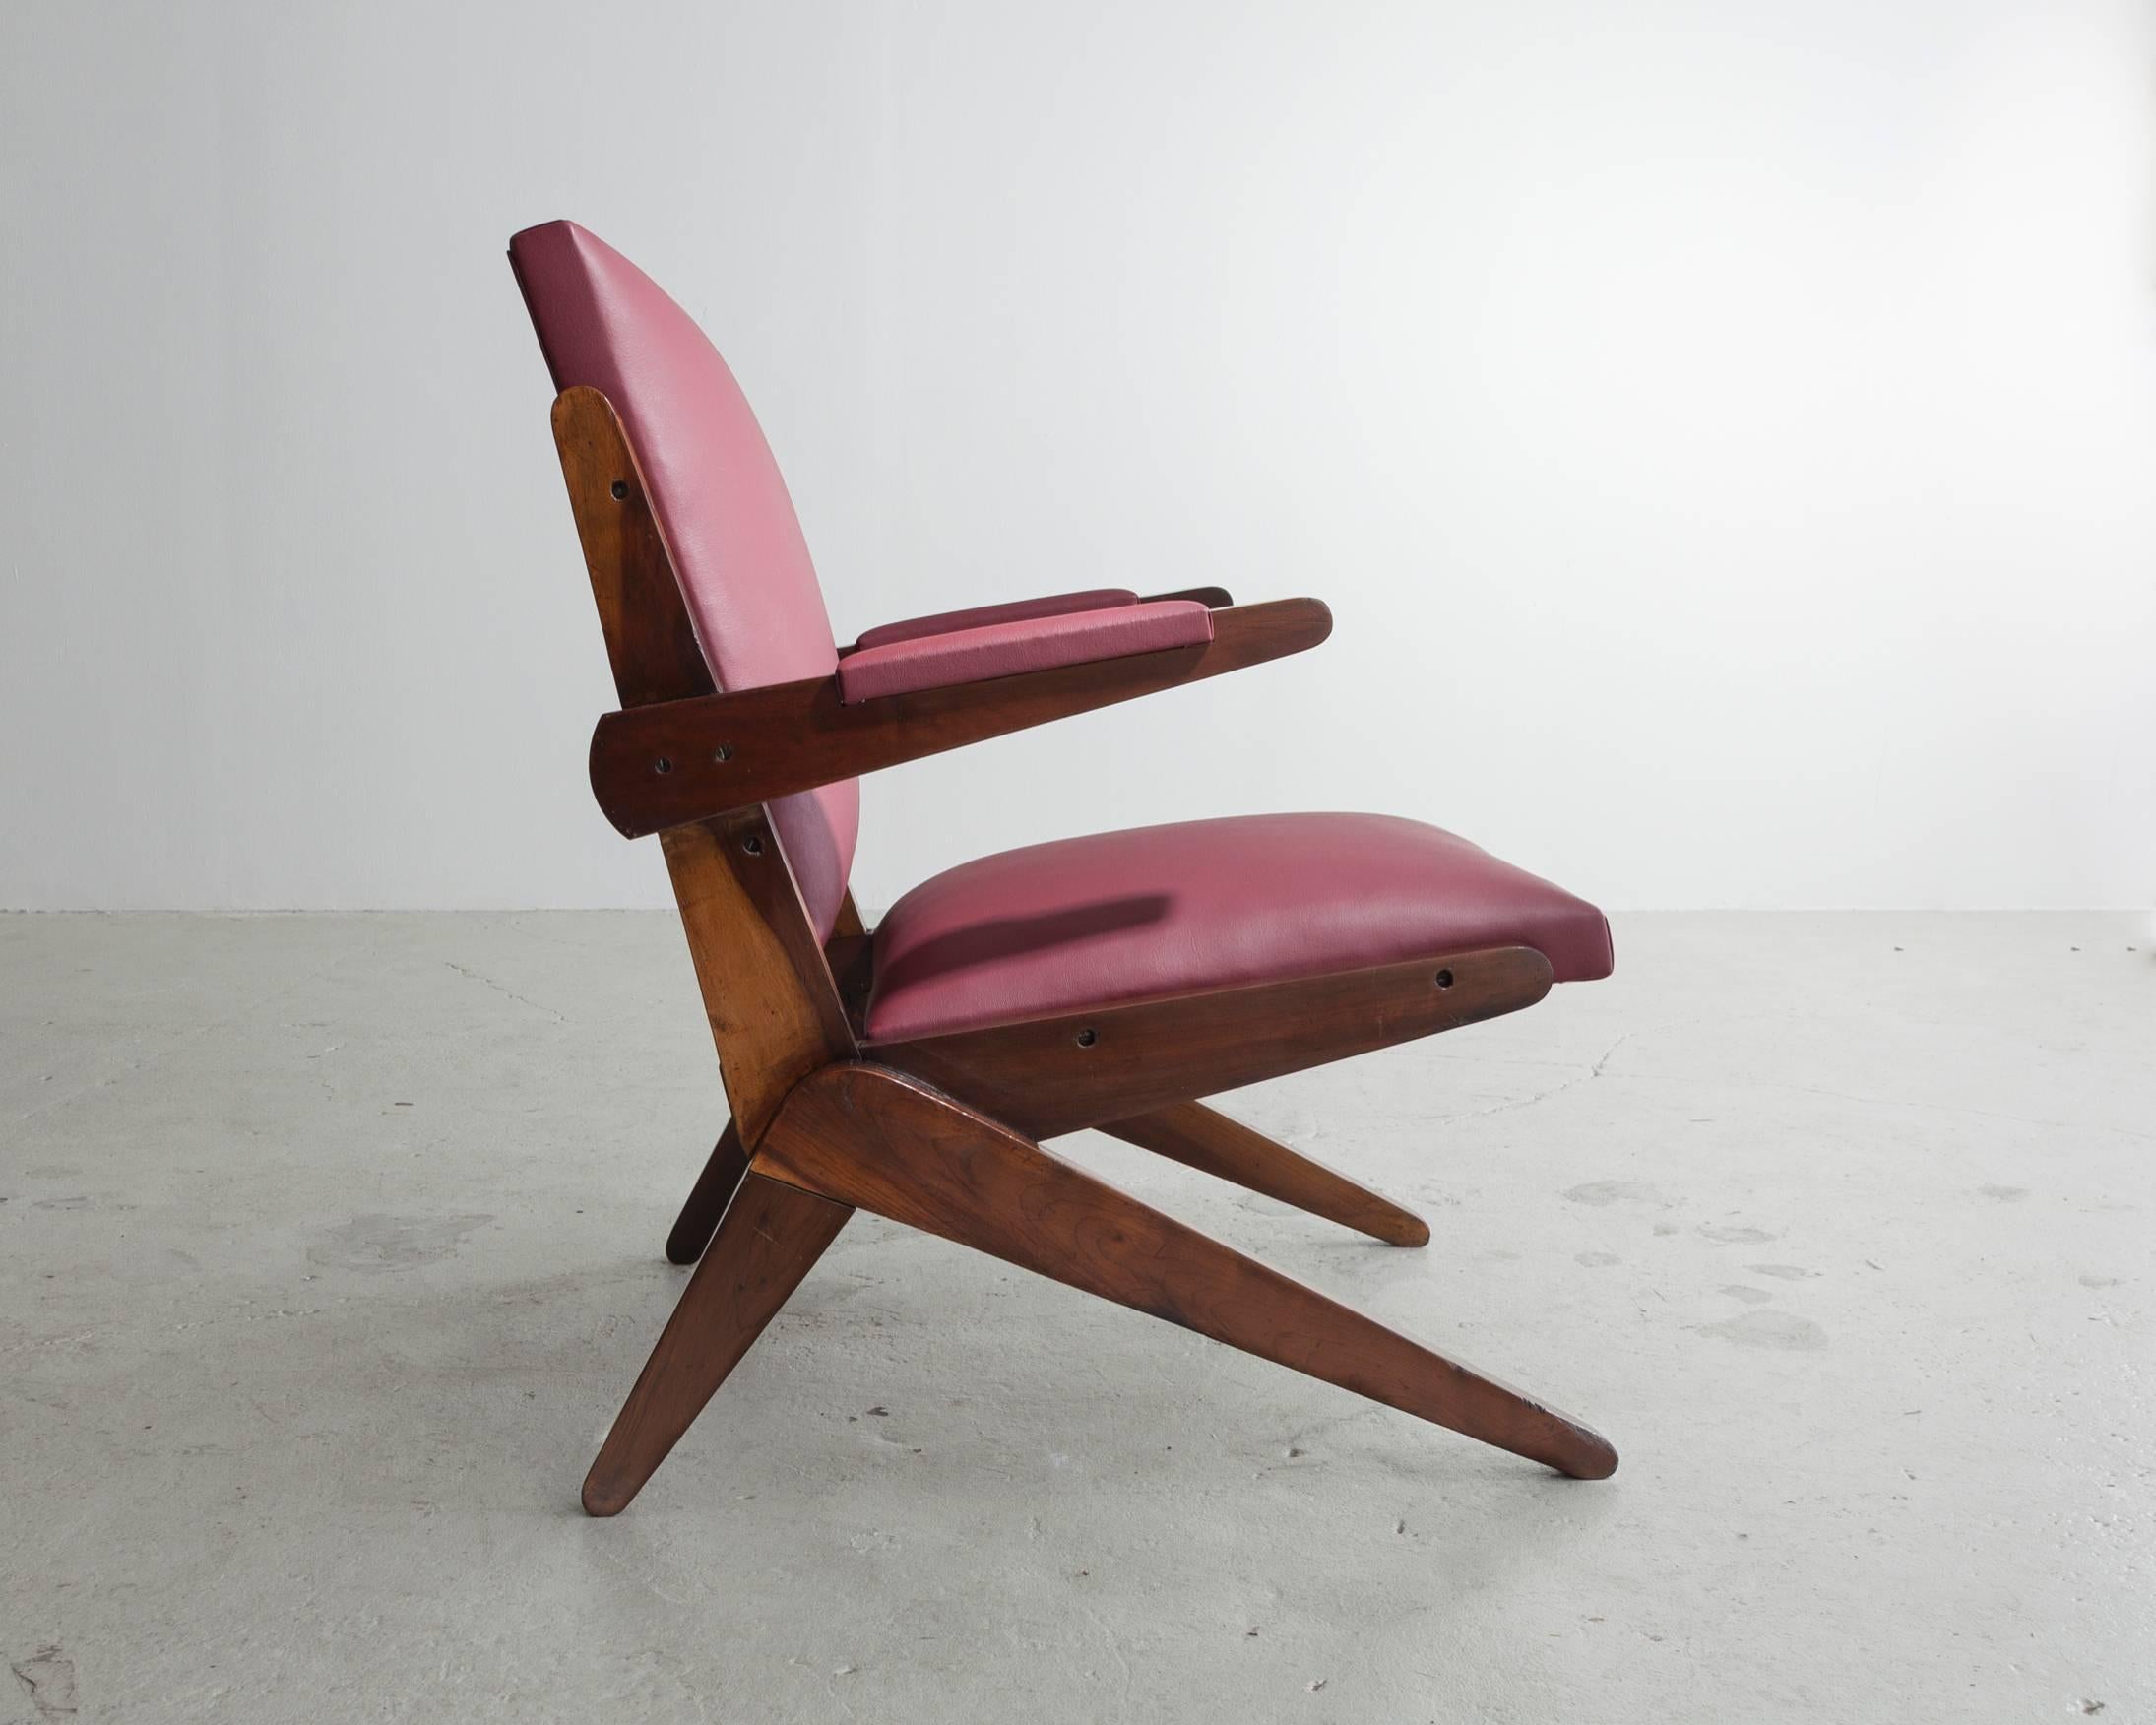 Lounge chair in wood with leather seat. Designed by Lina Bo Bardi, Brazil, 1960s. (Seat measures: 17